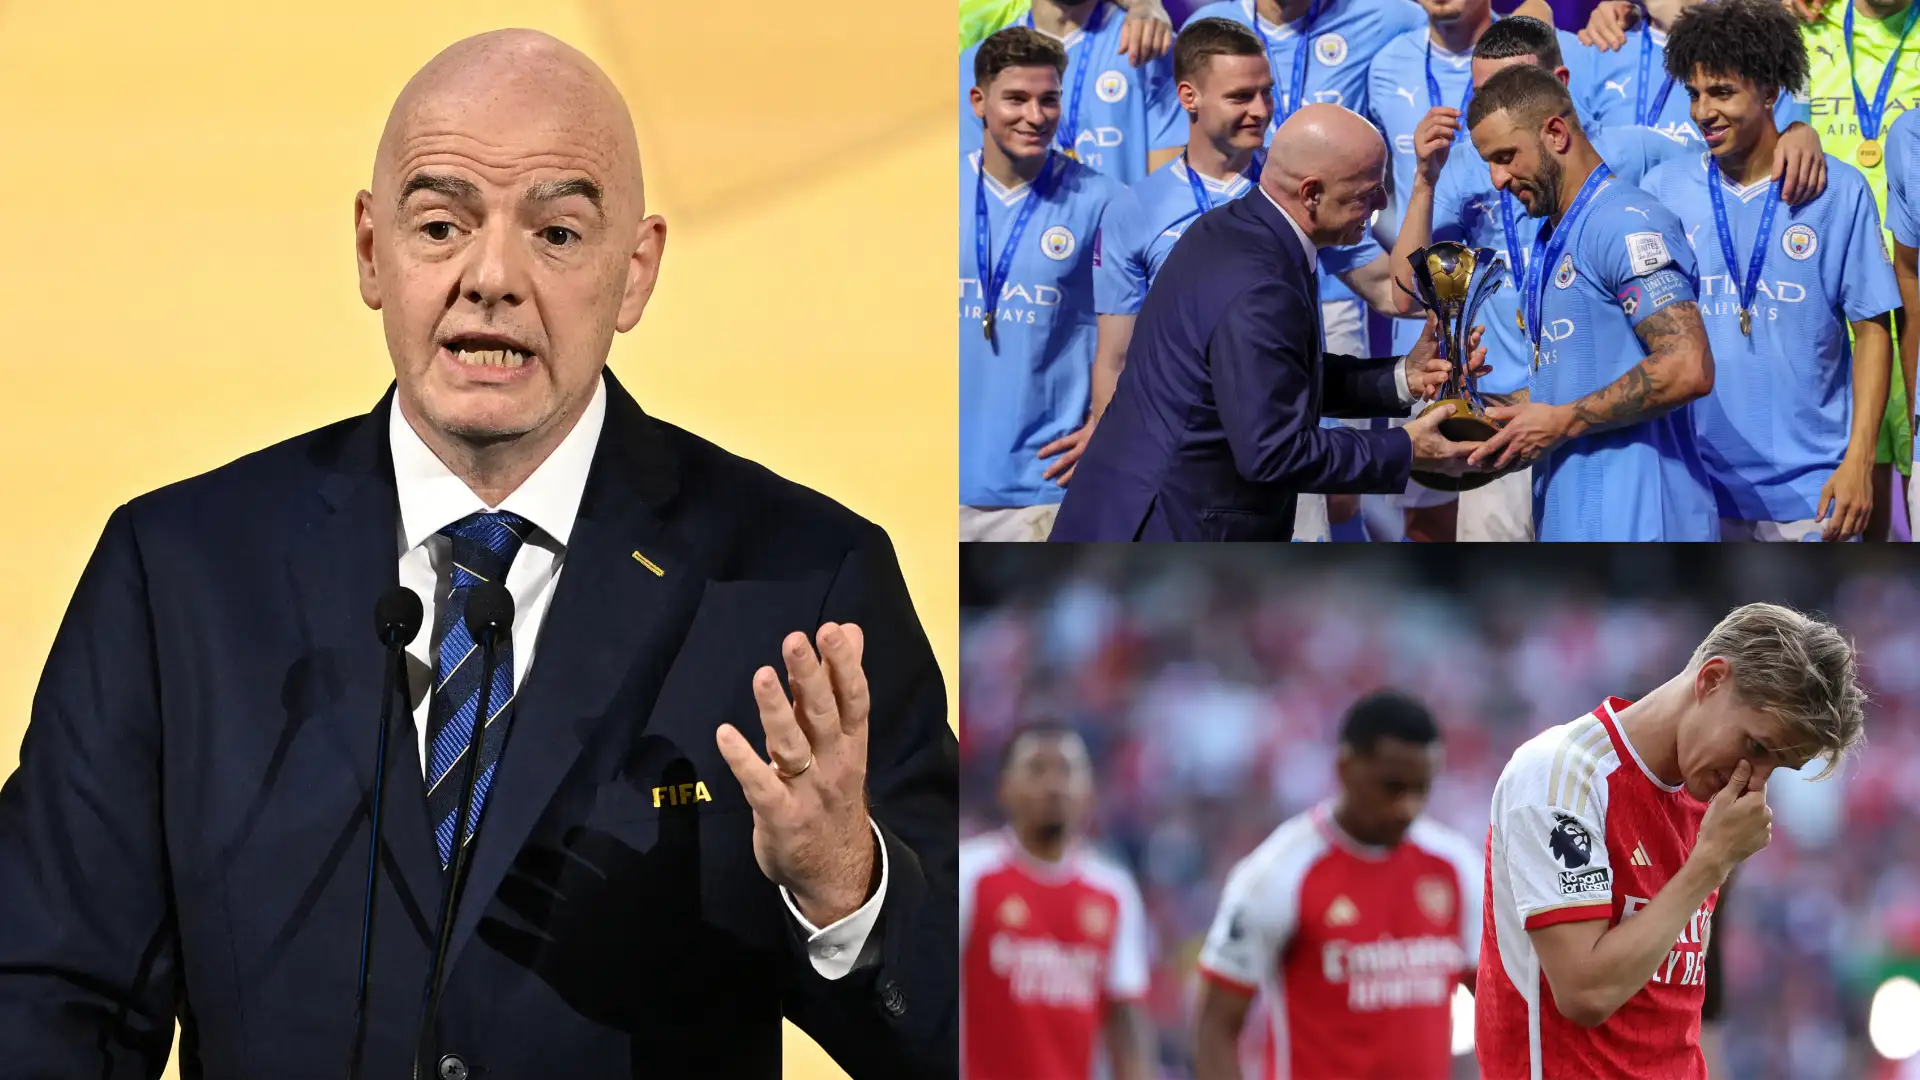 Premier League to be cut to 18 teams?! Clubs fear FIFA want to make changes as anger over heavy fixtures boils over to possible player strike